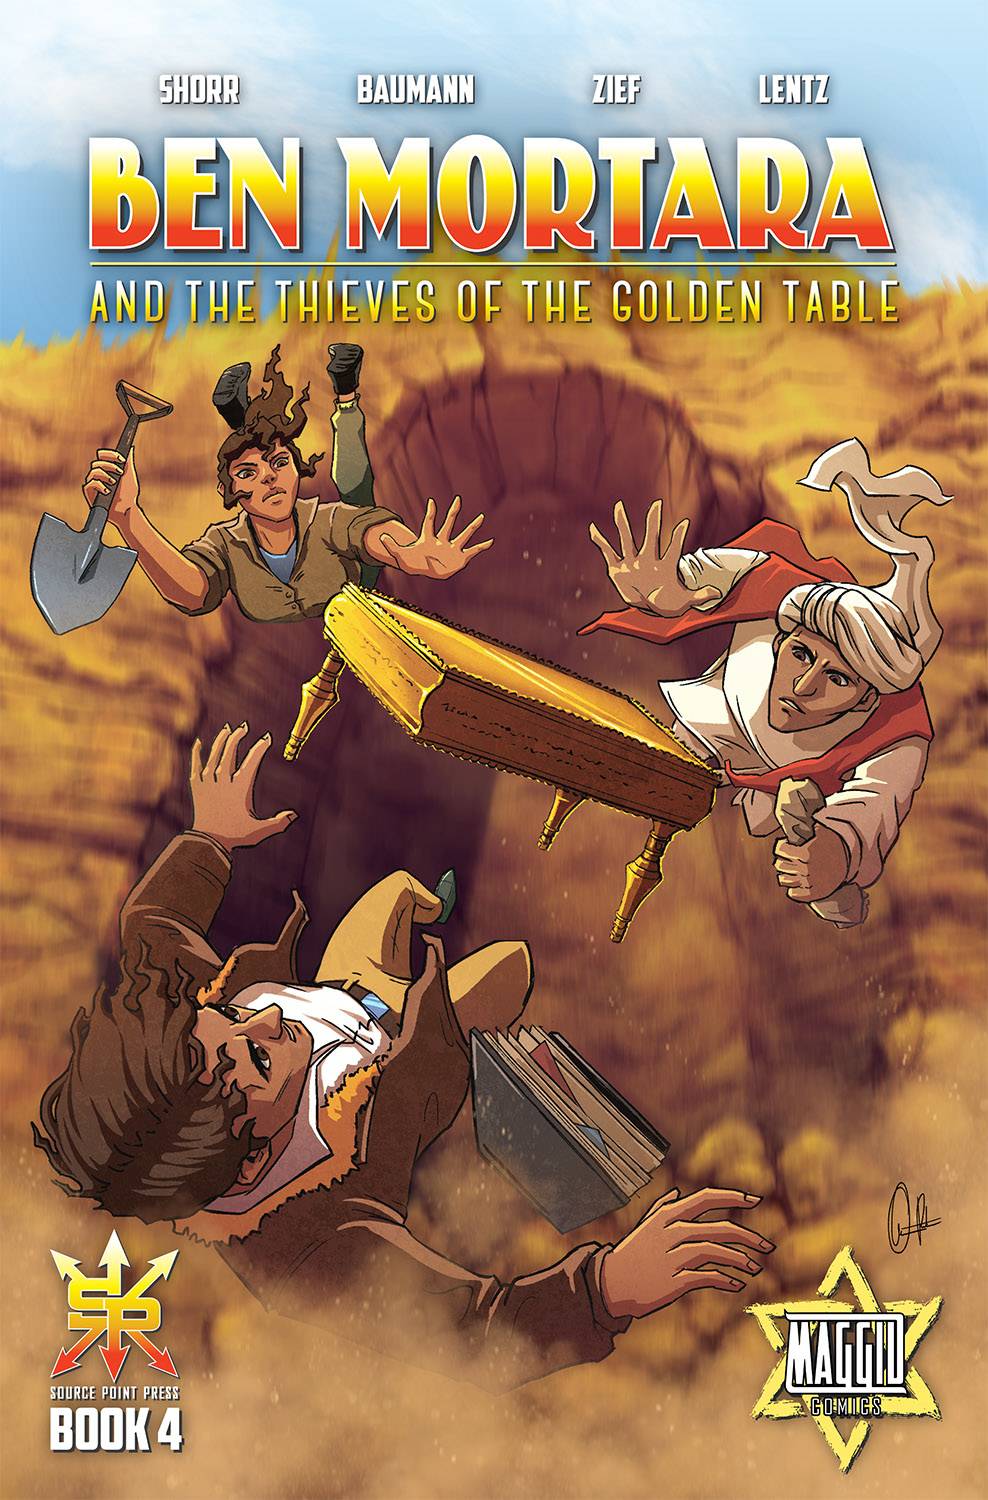 BEN MORTARA AND THIEVES OF GOLDEN TABLE #4 (OF 4) cover